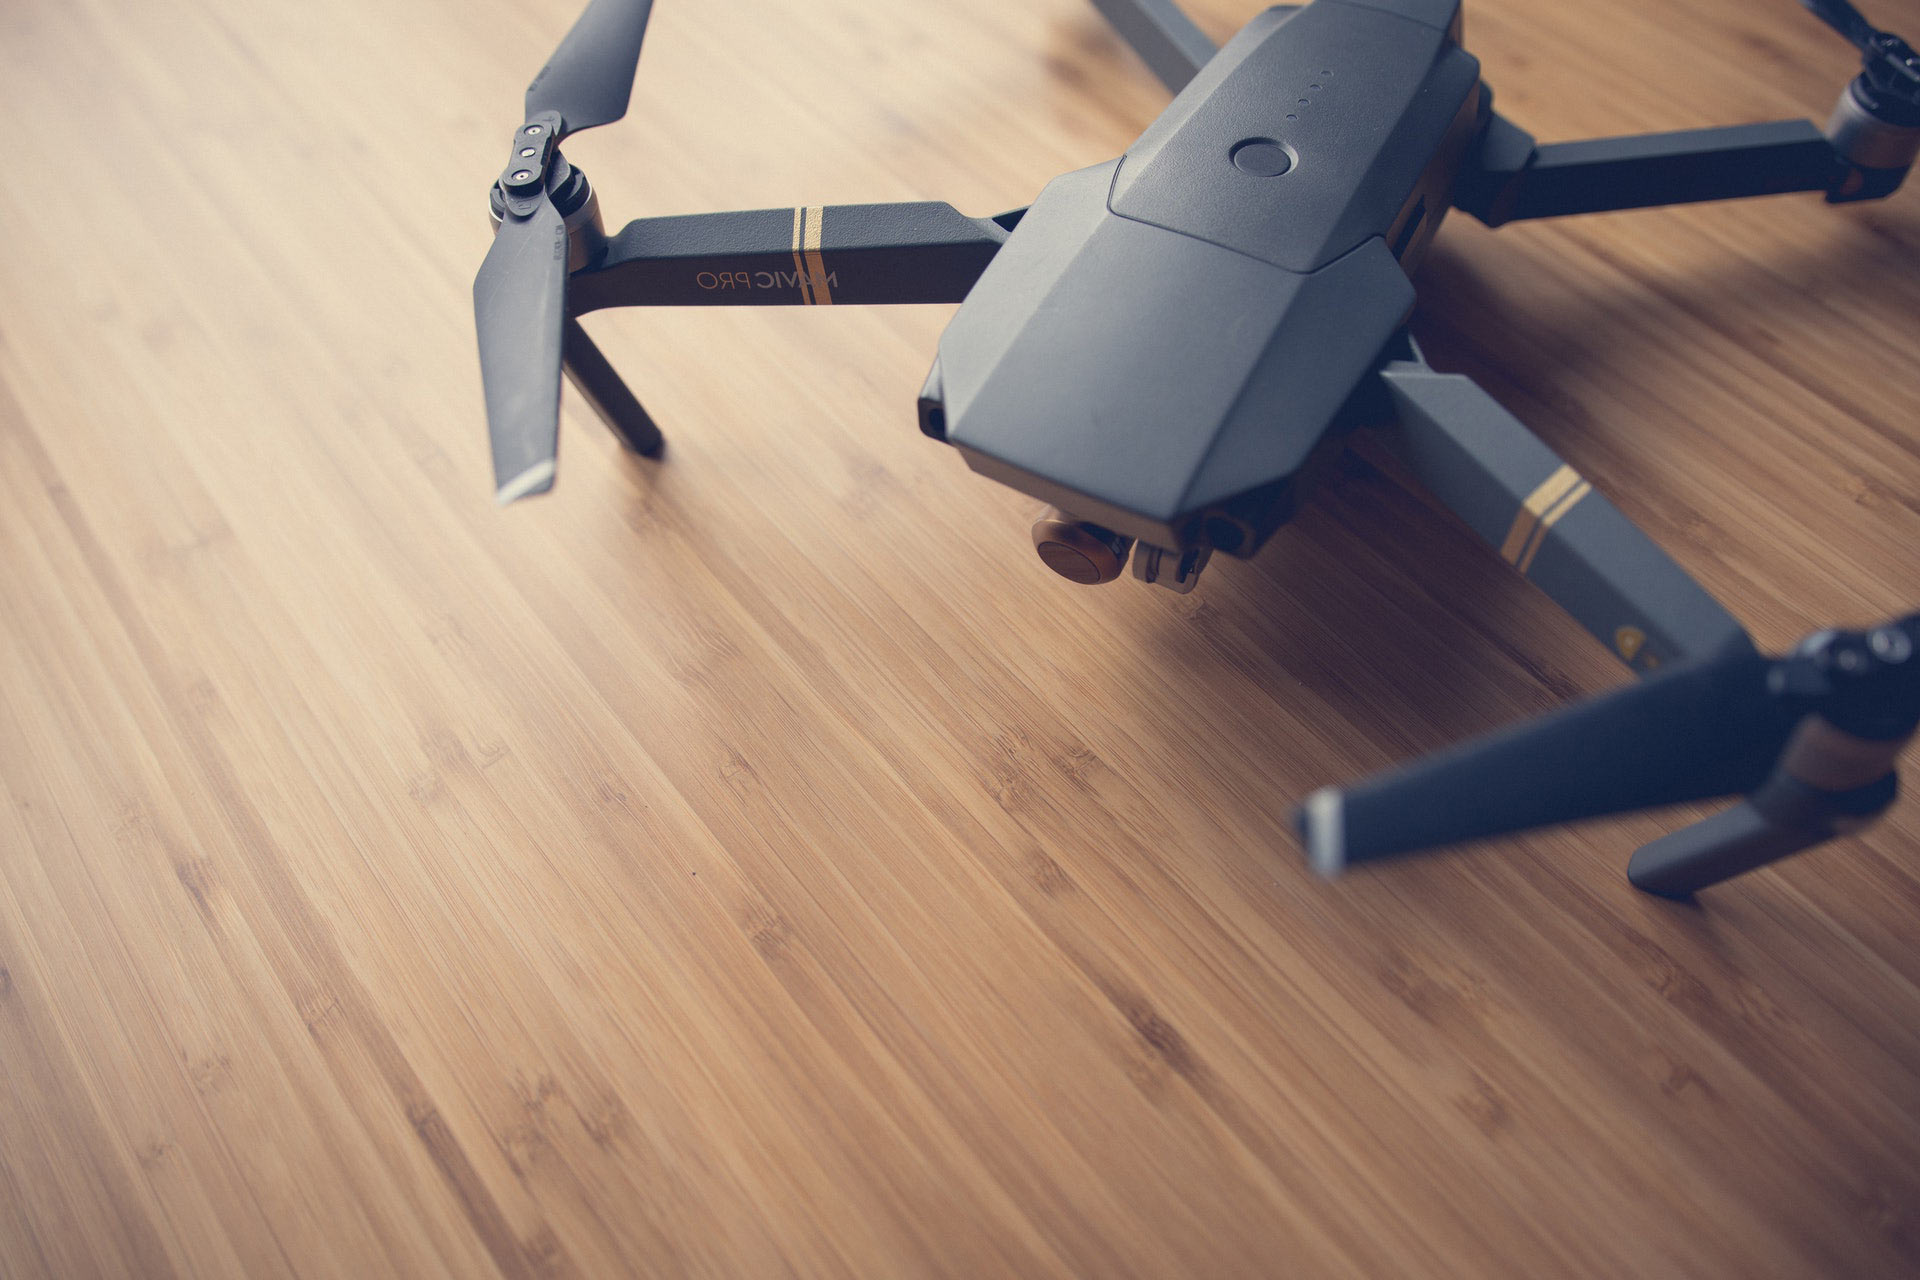 quadcopter-on-wooden-surface-1601217